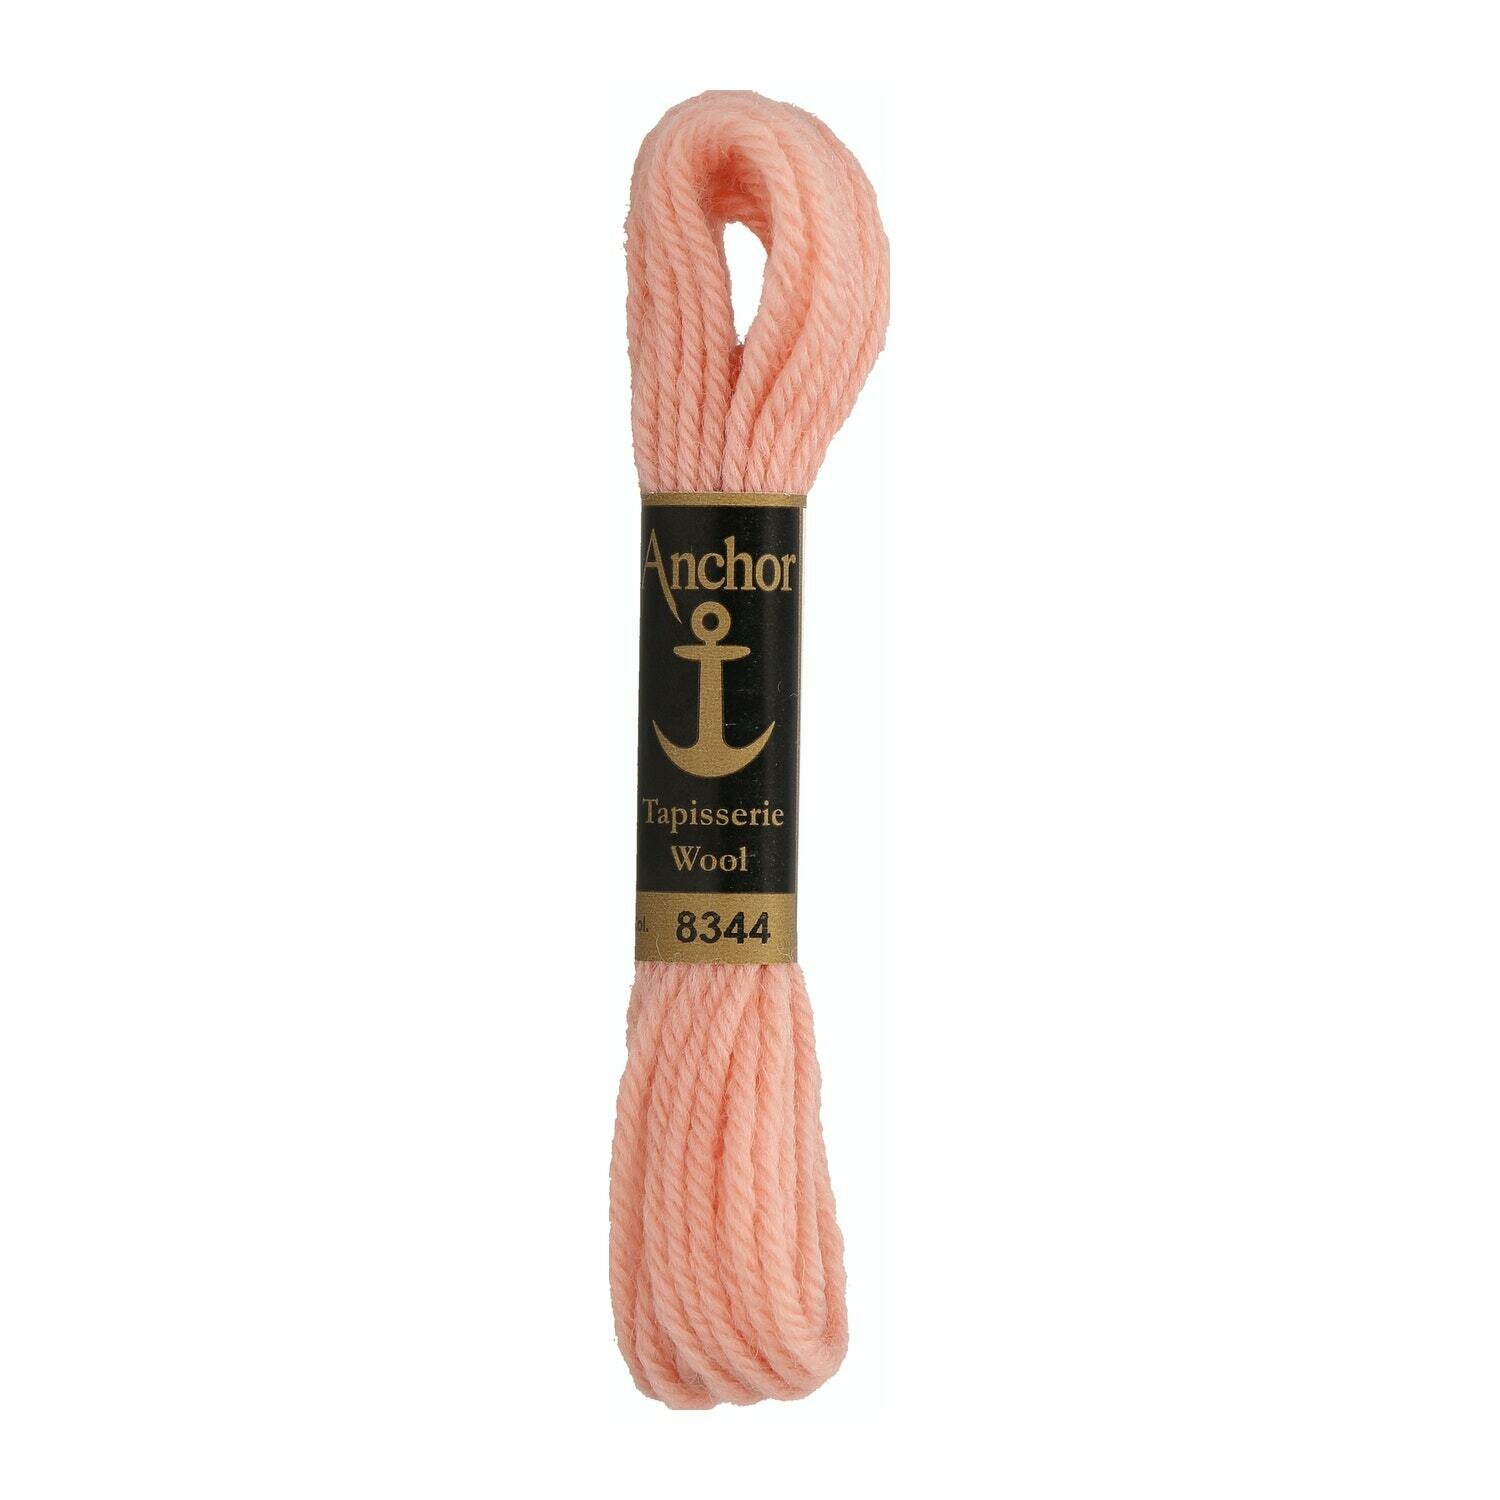 Anchor Tapisserie Wool # 08344